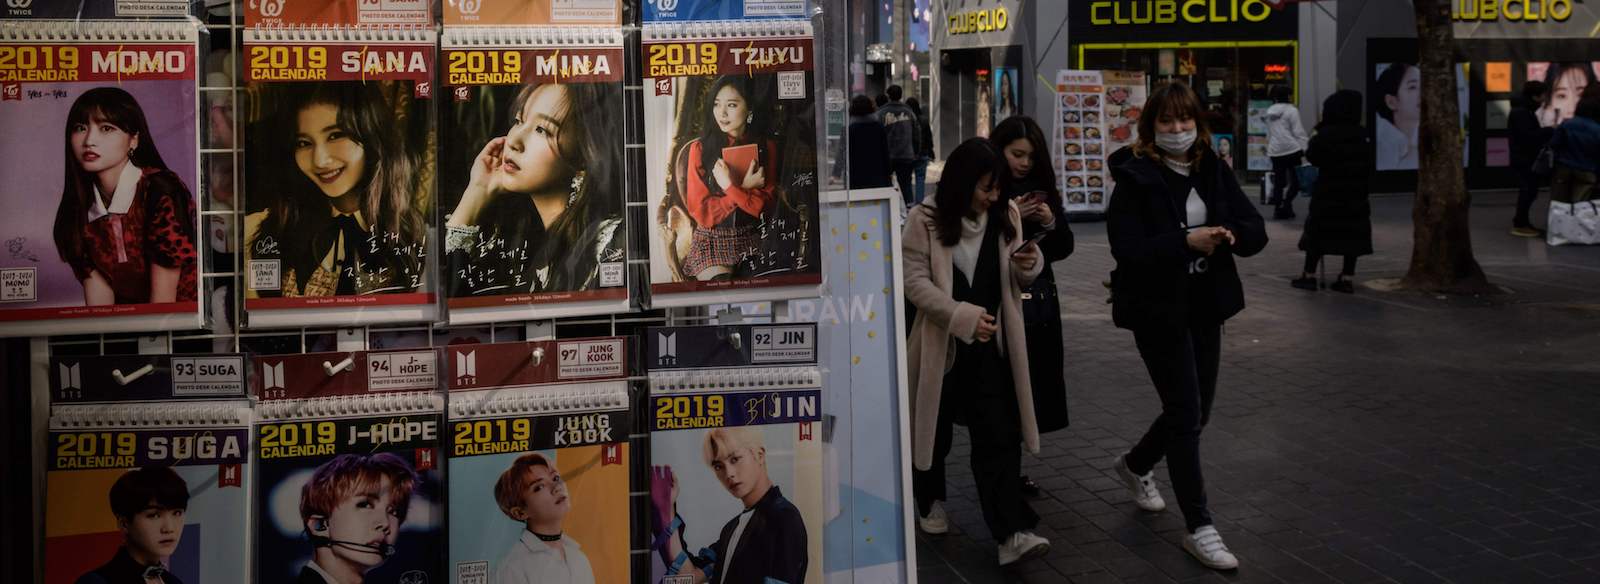 Korean Rape Xnxc All - The K-Pop sex and drugs scandal sweeping South Korea | Lowy Institute